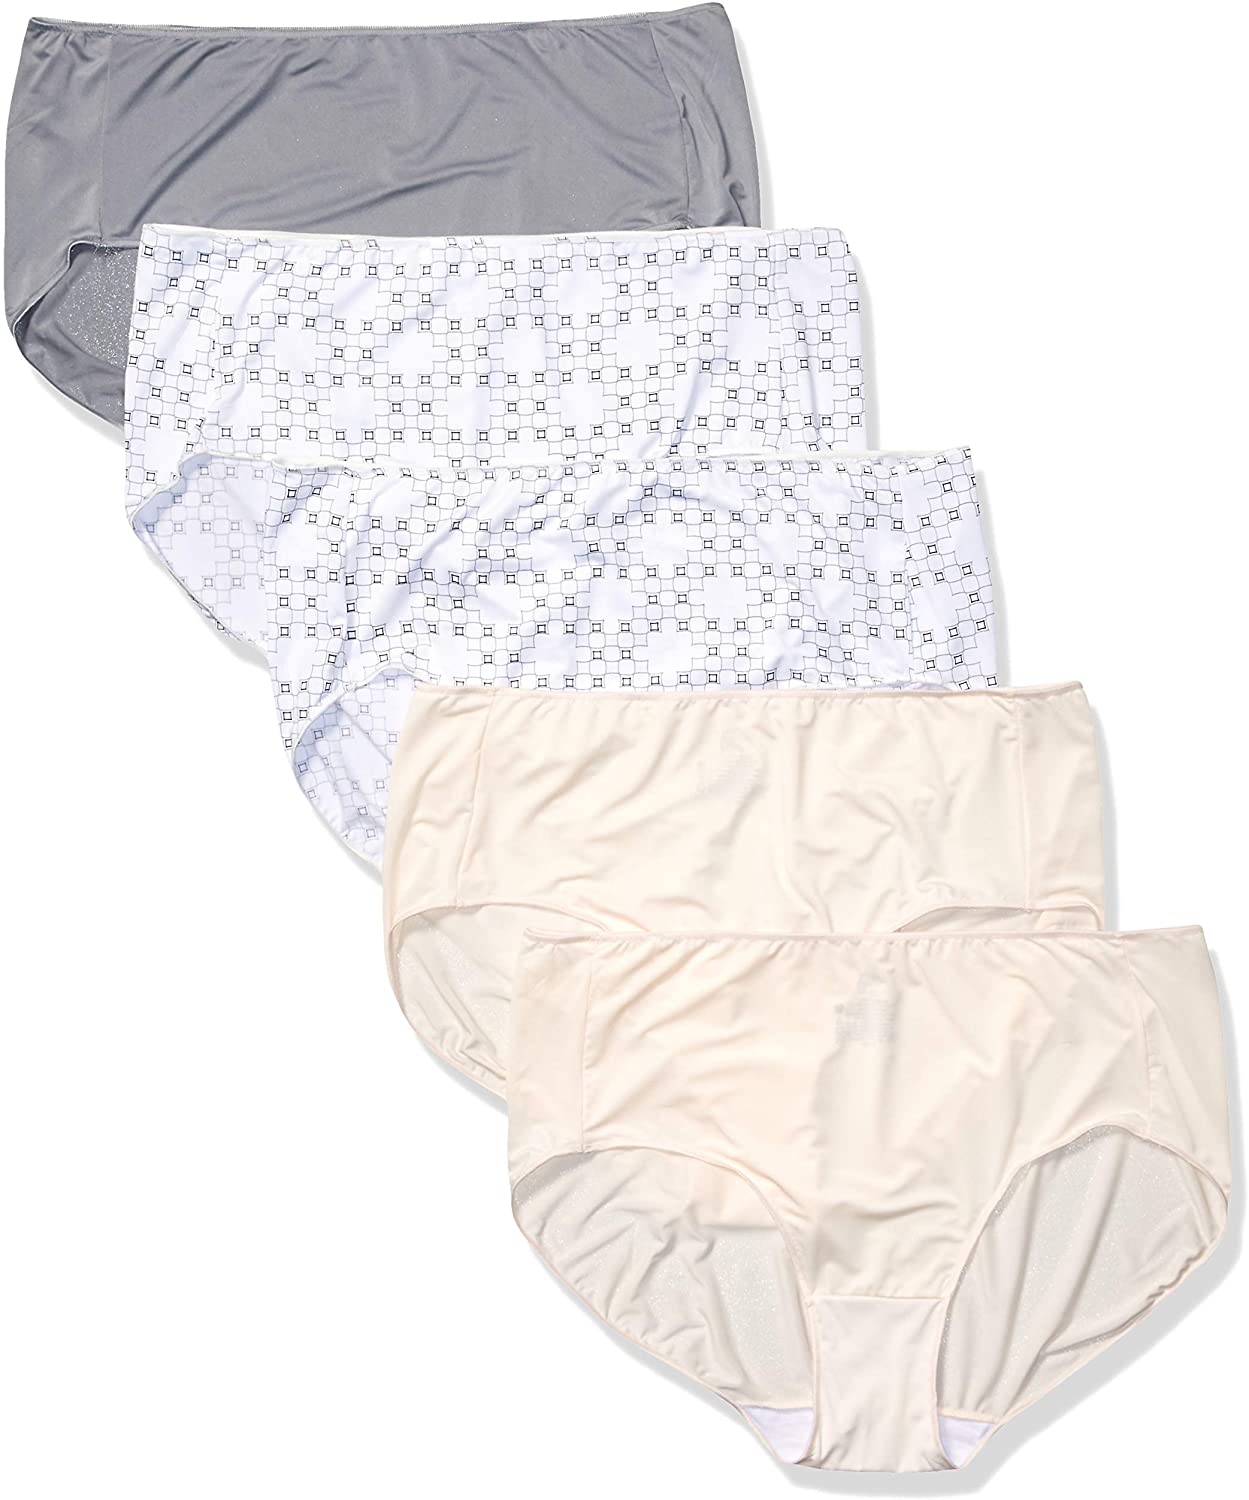 Price:$11.00 JUST MY SIZE Women's Smooth Stretch Microfiber Brief 5-Pack at Amazon Women’s Clothing store